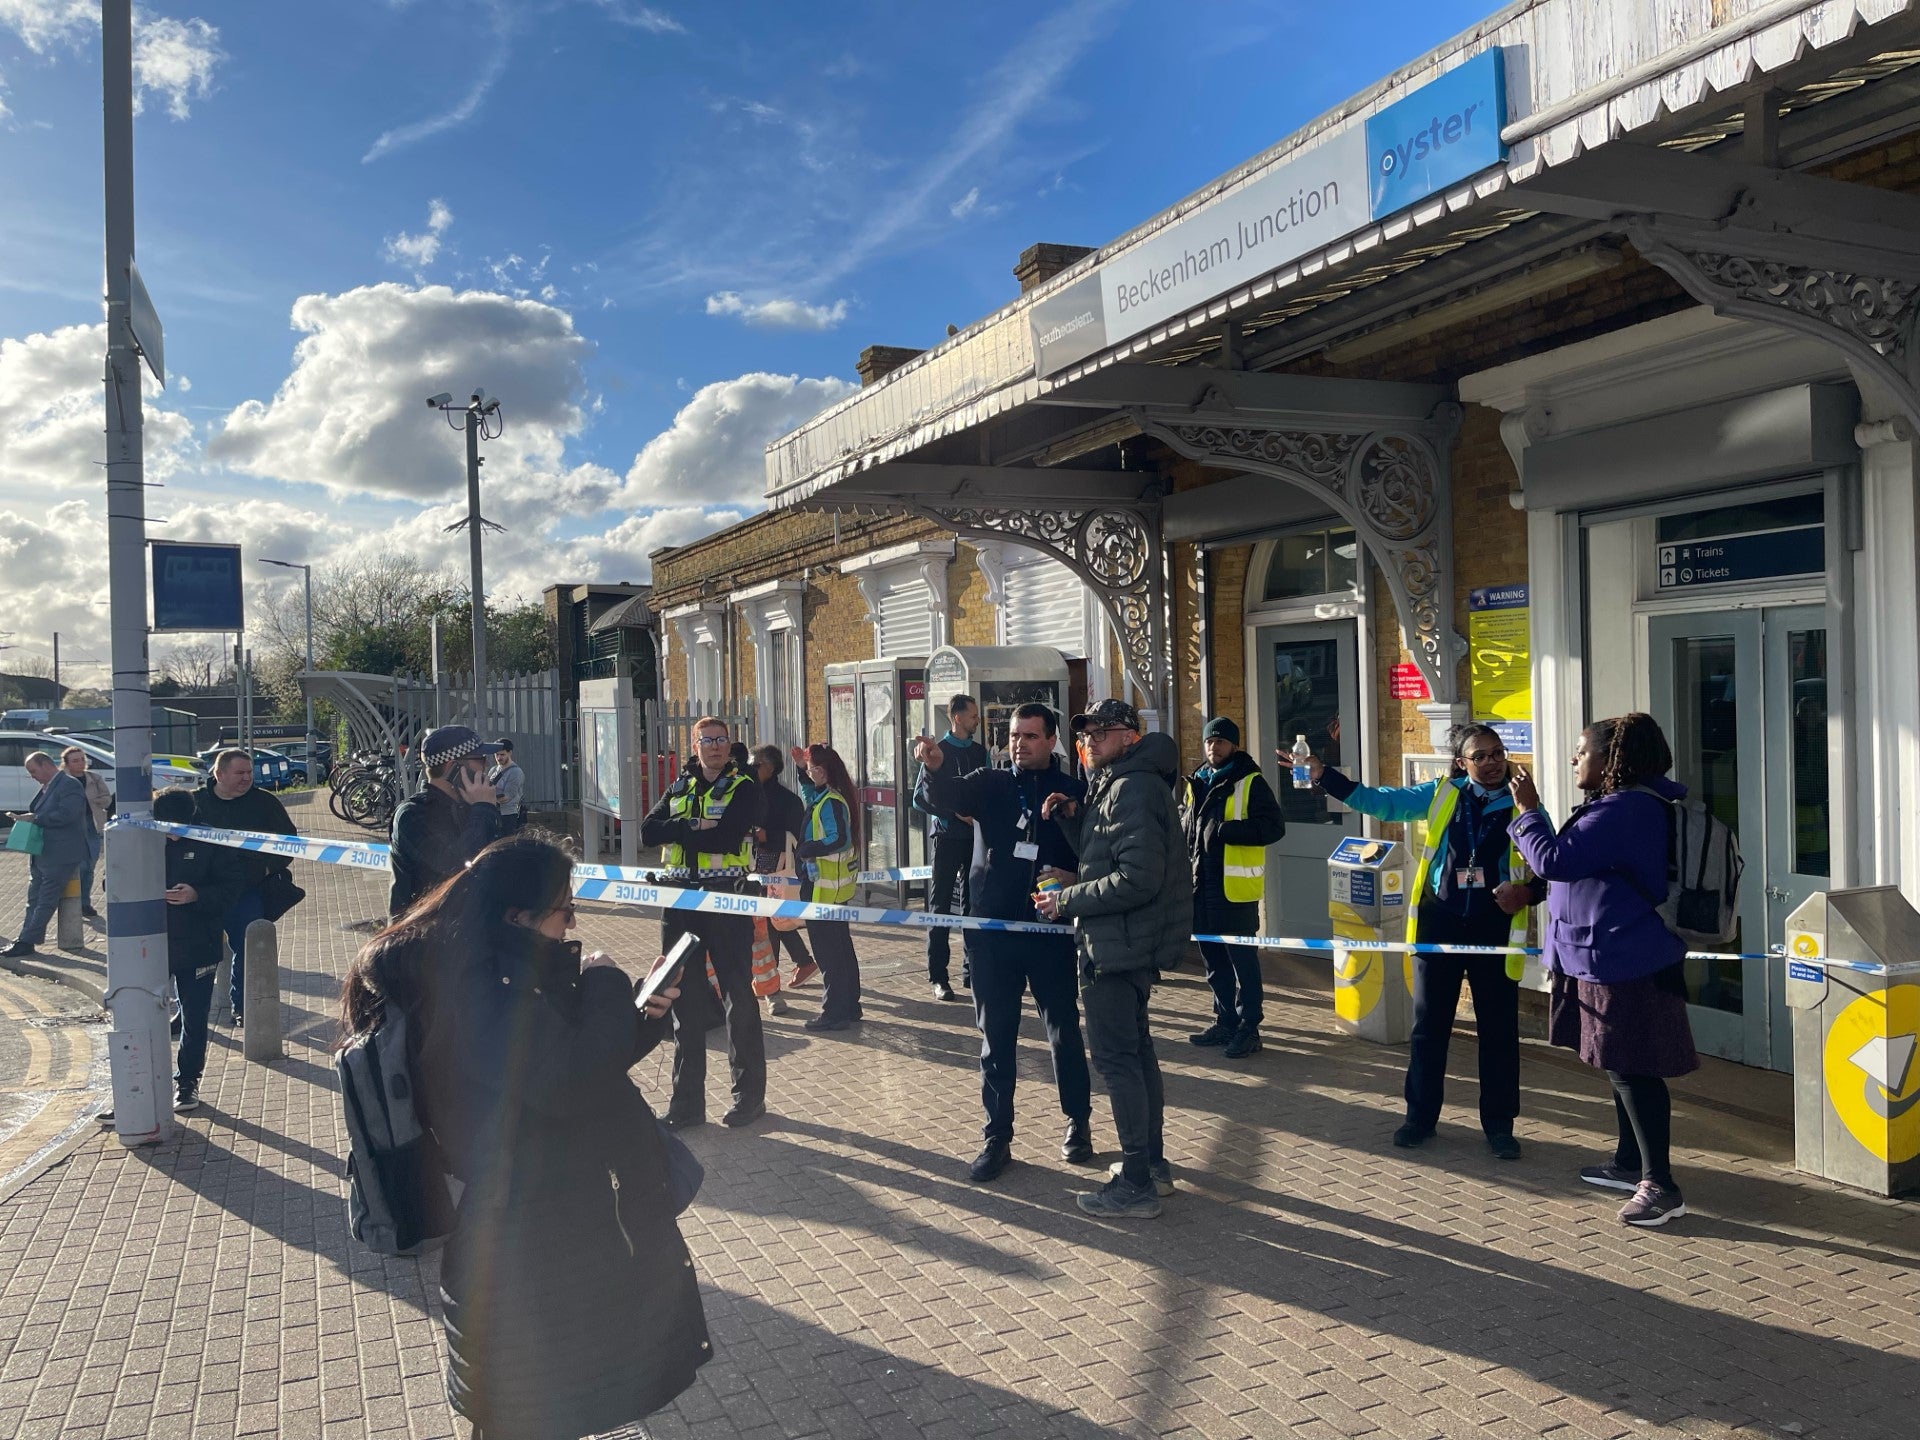 British Transport Police (BTP) said they received reports of two men fighting between Beckenham and Shortlands railway station shortly before 4pm on Wednesday